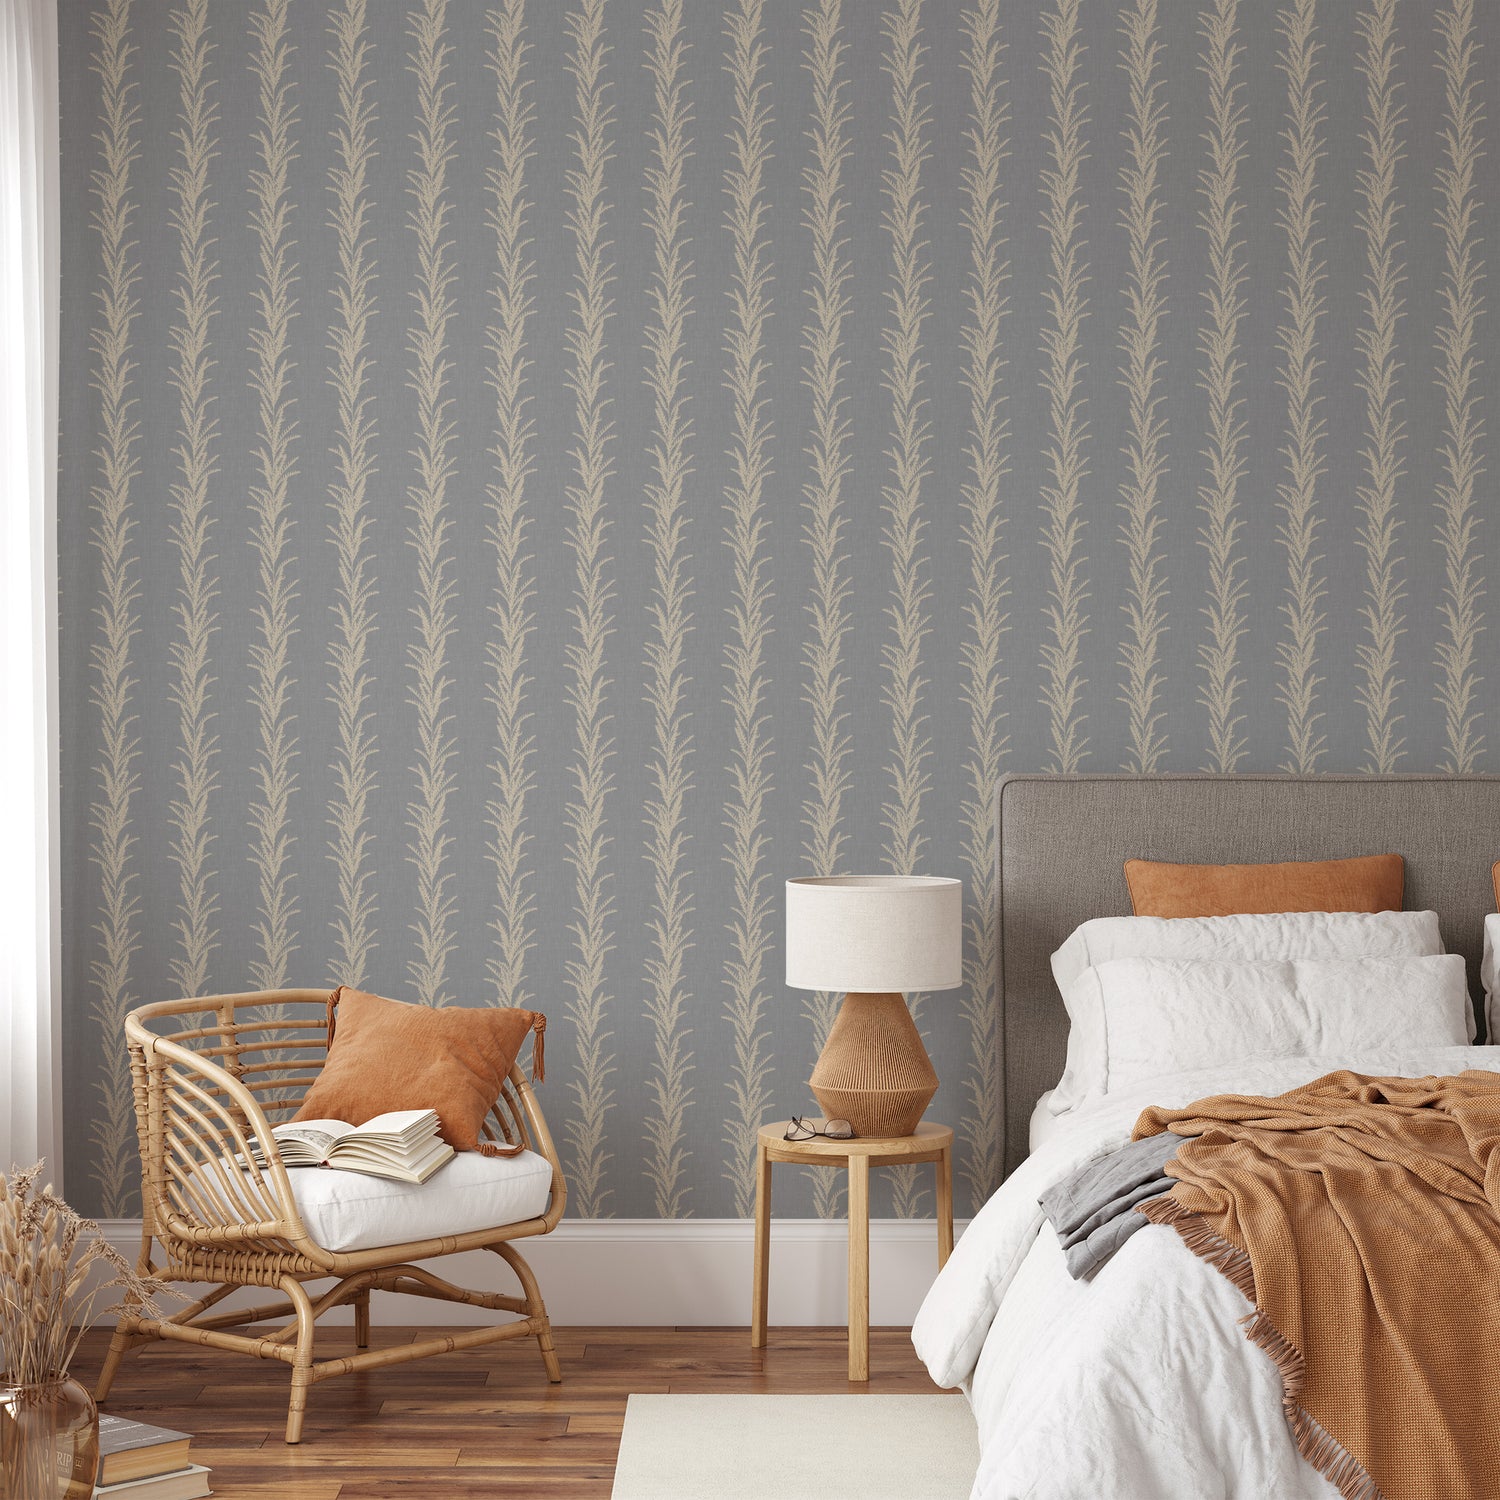 Make your space come alive with this Vertical Vines Wallpaper. Its distinctive vertical lines add texture and class, creating a sophisticated, modern look that exudes elegance and exclusivity. 